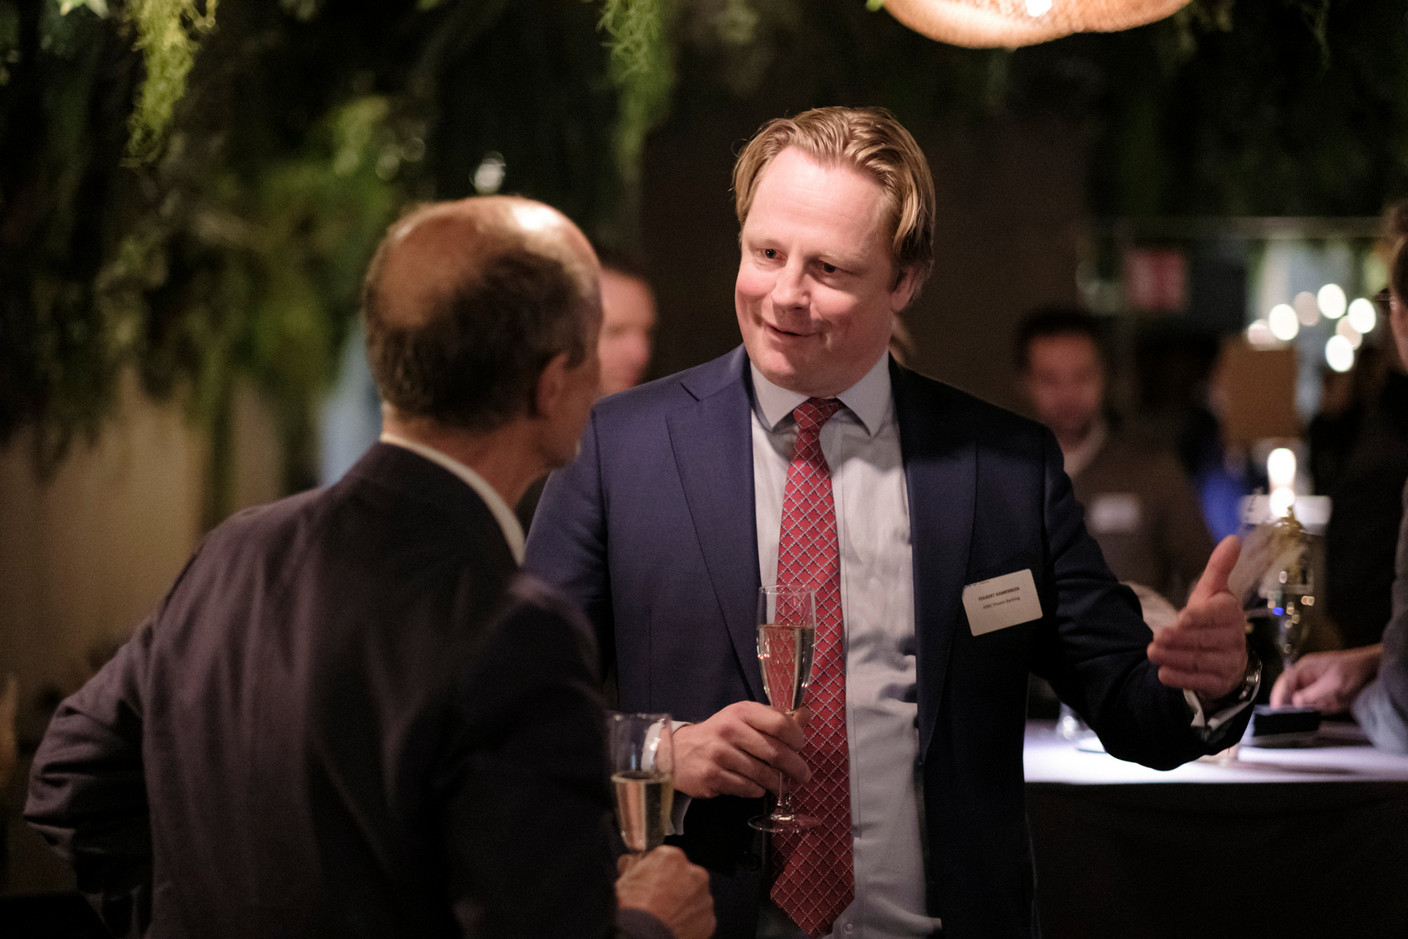 Folkert Kamerbeek (HSBC Private Banking) at the Luxembourg Association of Family Offices (LAFO) winter 2023 cocktail, which took place on 8 February 2023 at Hertz PopUp. Photo: Jan Hanrion for LAFO